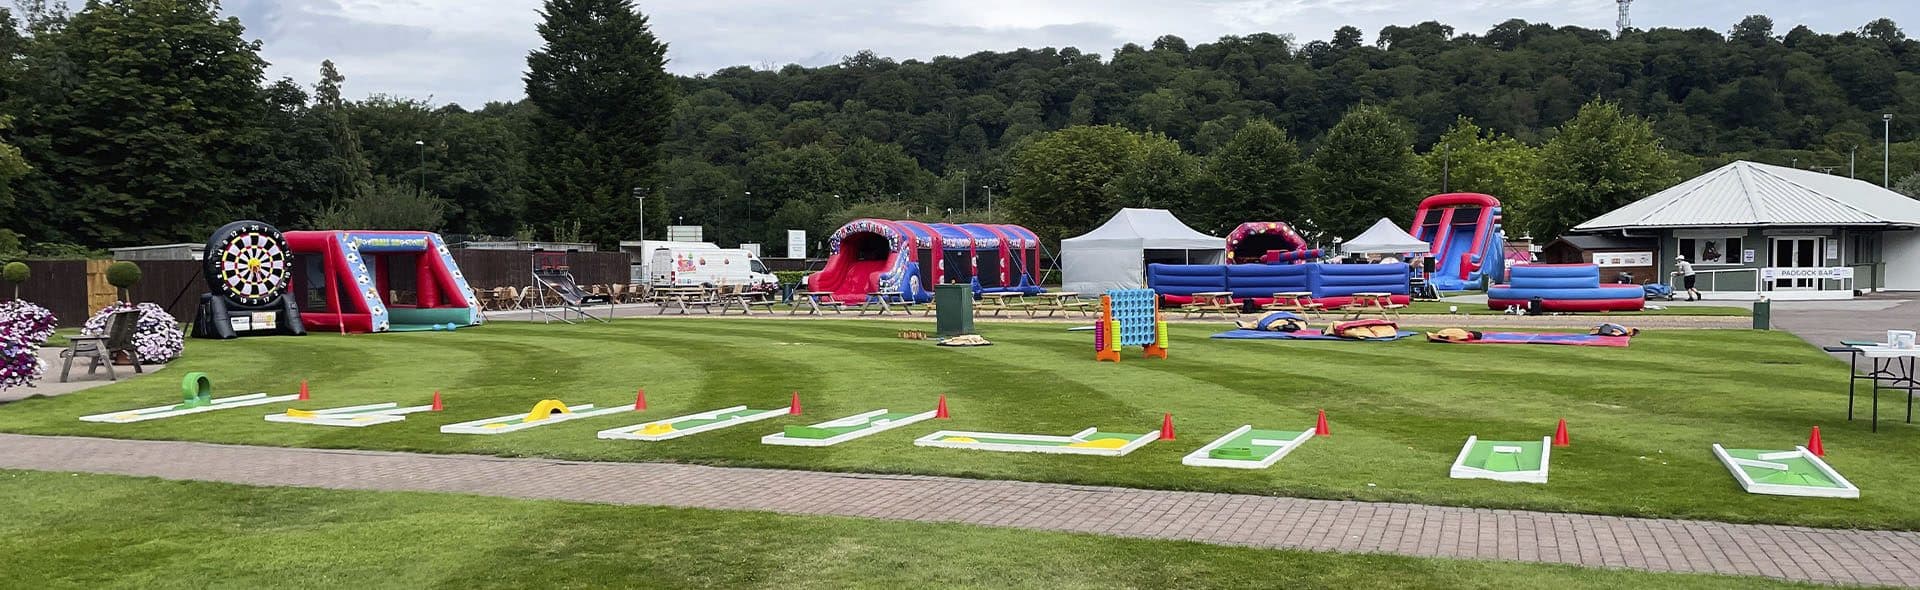 Event at Nottingham Racecourse for Inflatables